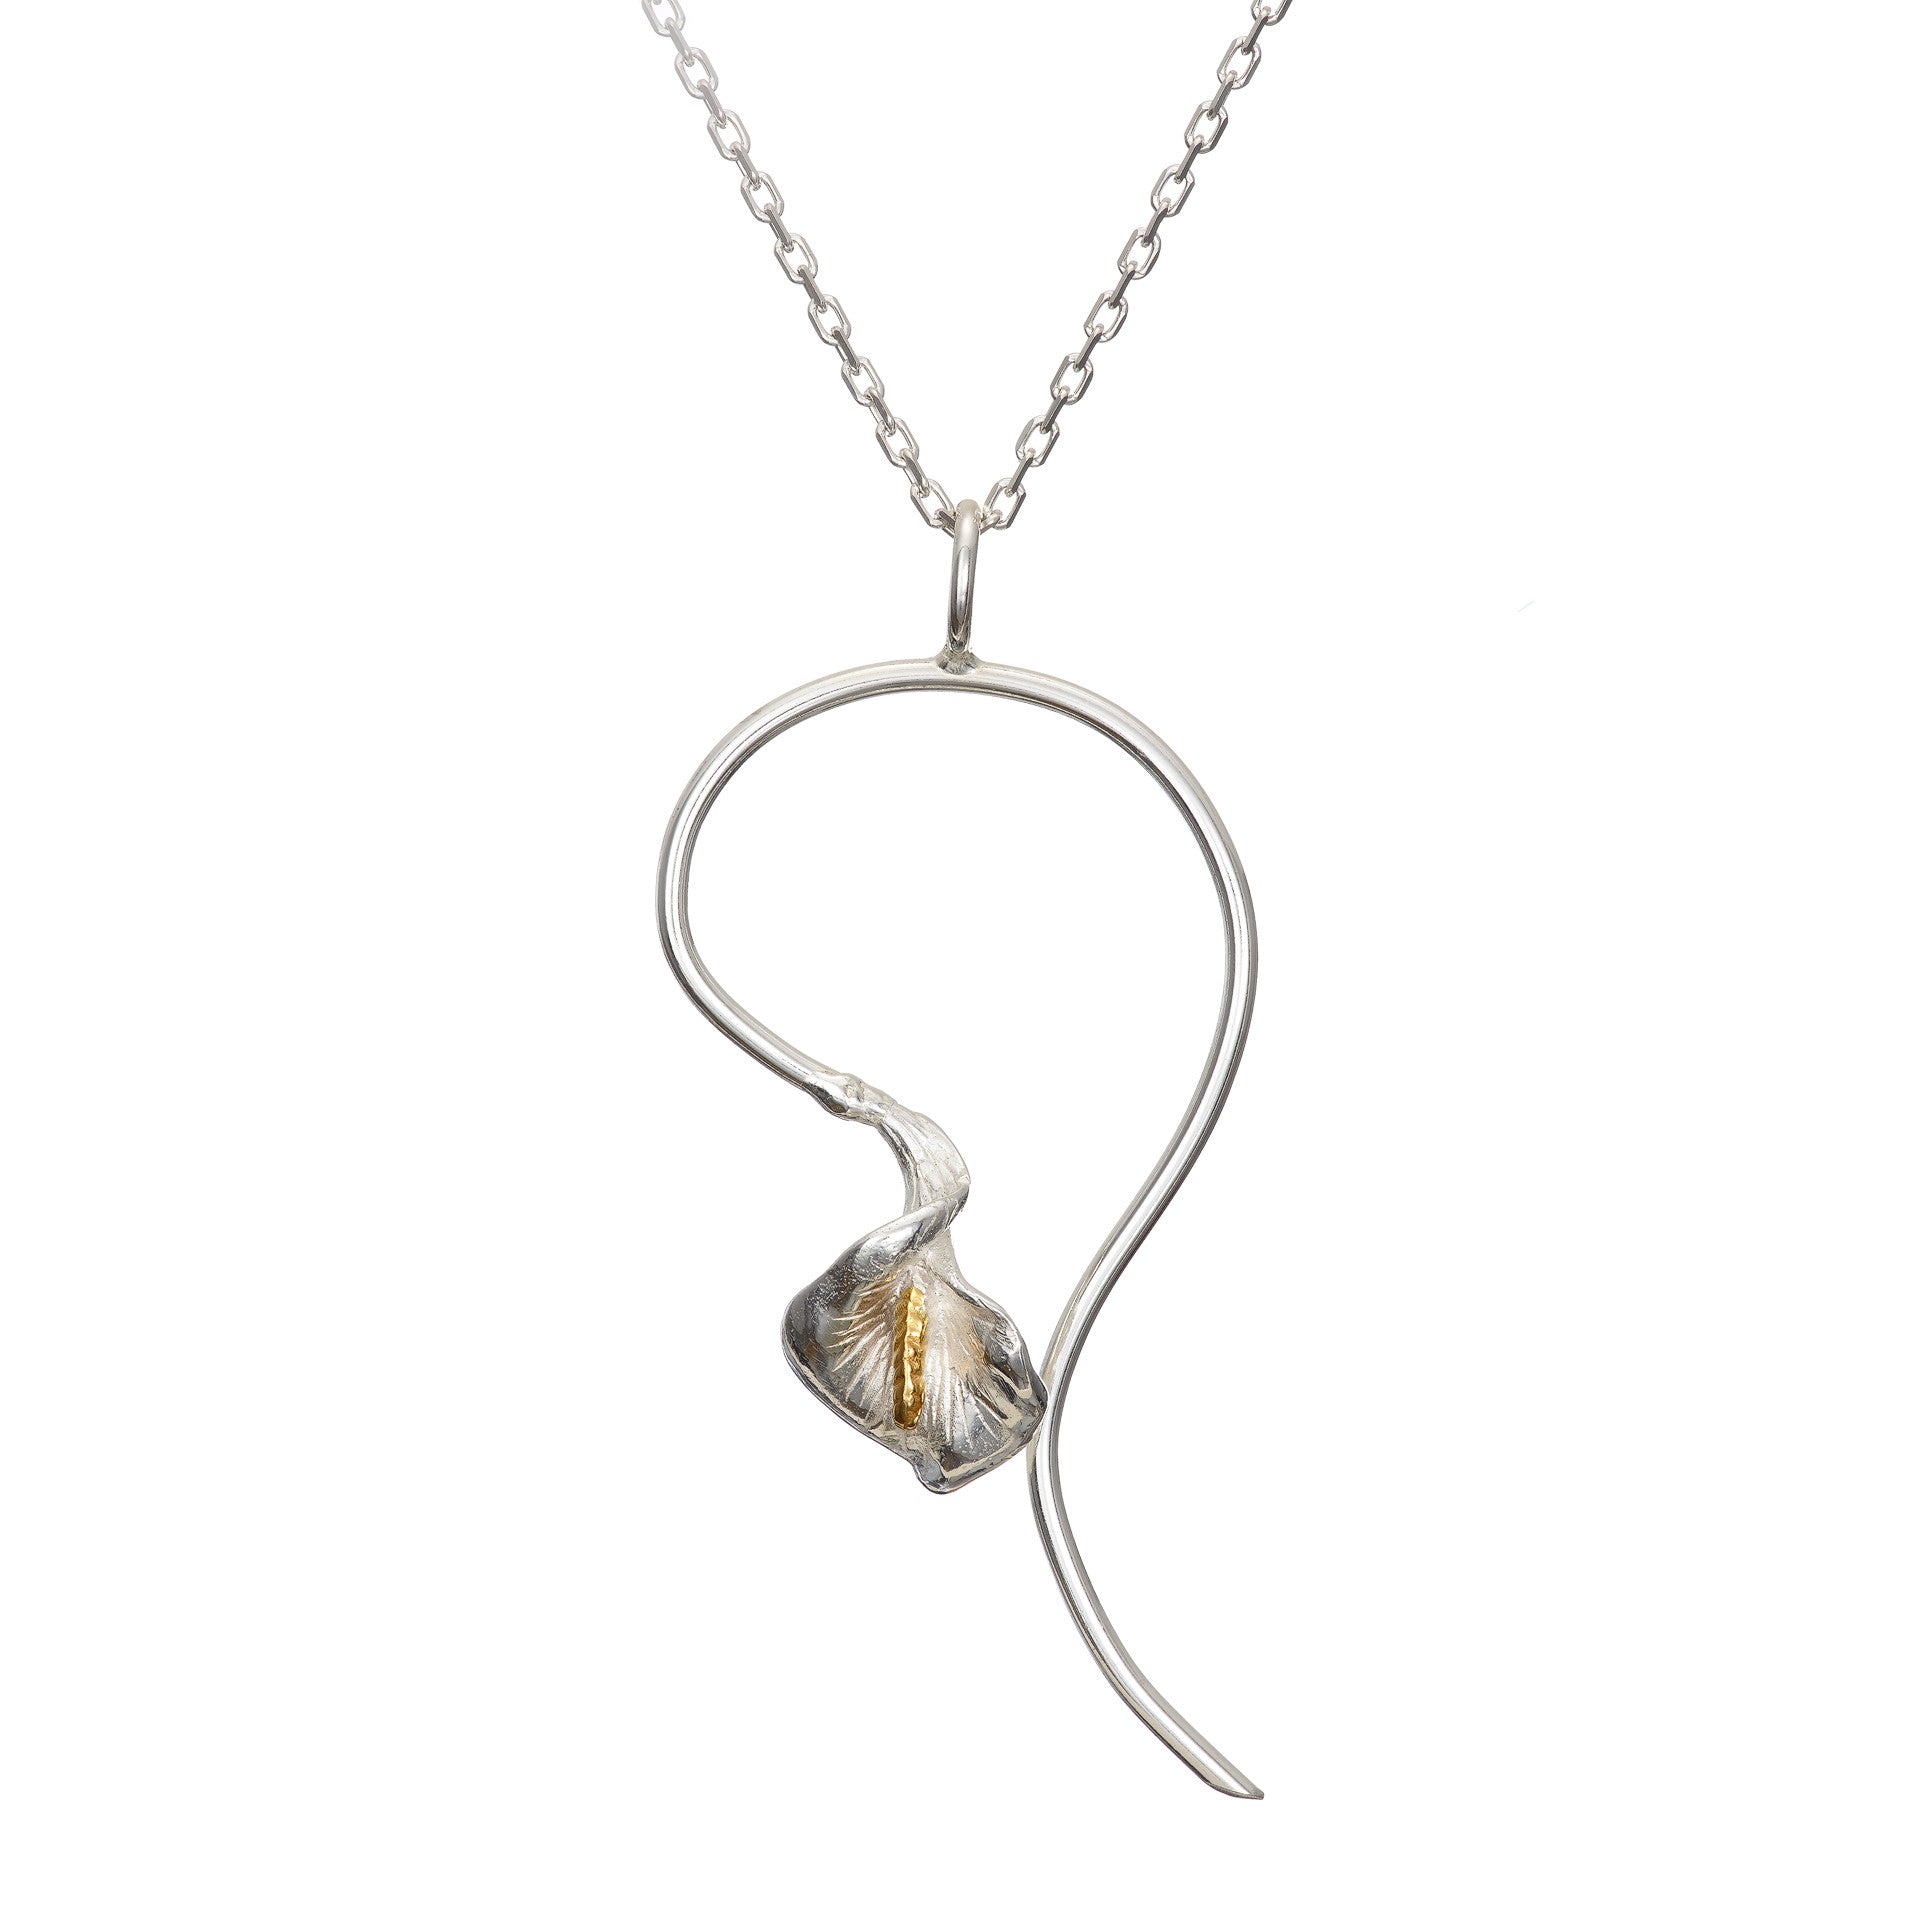 Lily Peace Pendant is handcrafted by Elena Brennan Jewellery, part of the Mise Éire Collection.